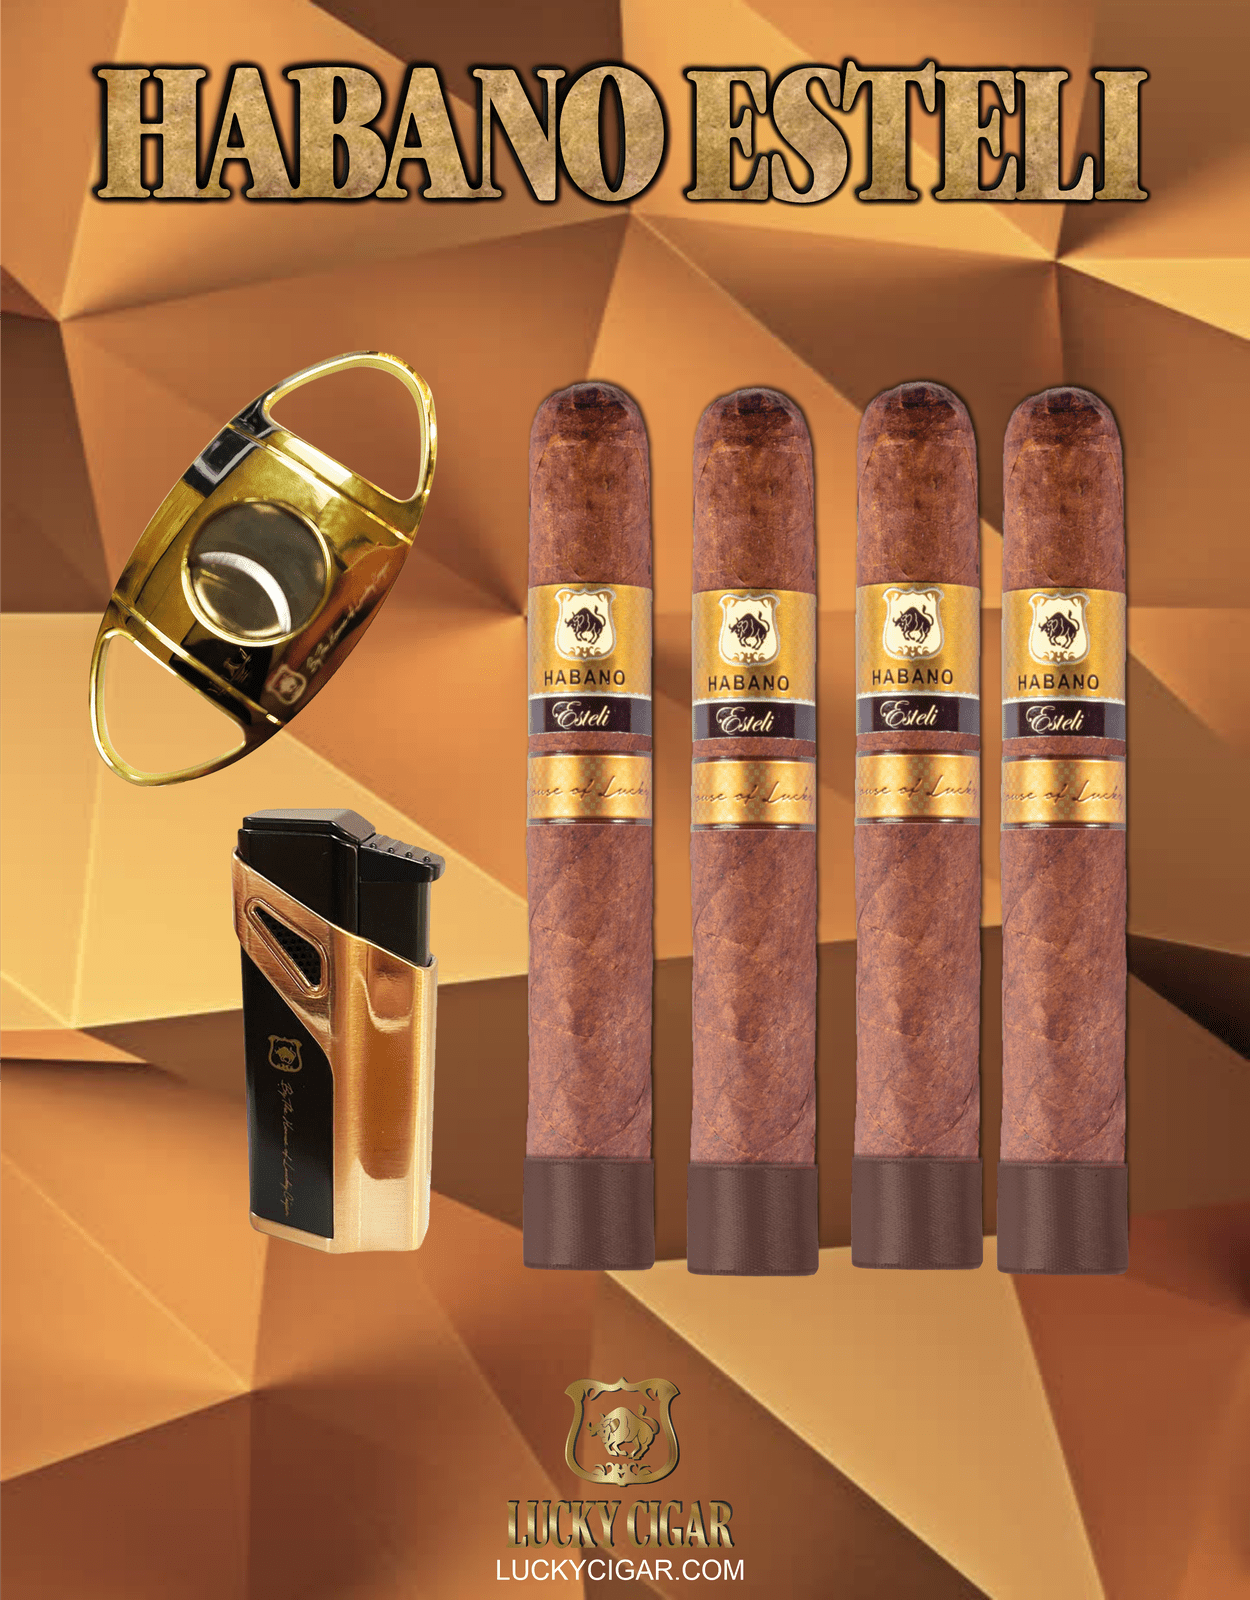 Habano Cigars: Habano Esteli by Lucky Cigar: Set of 4 Cigars, 4 Toro with Cutter, Torch